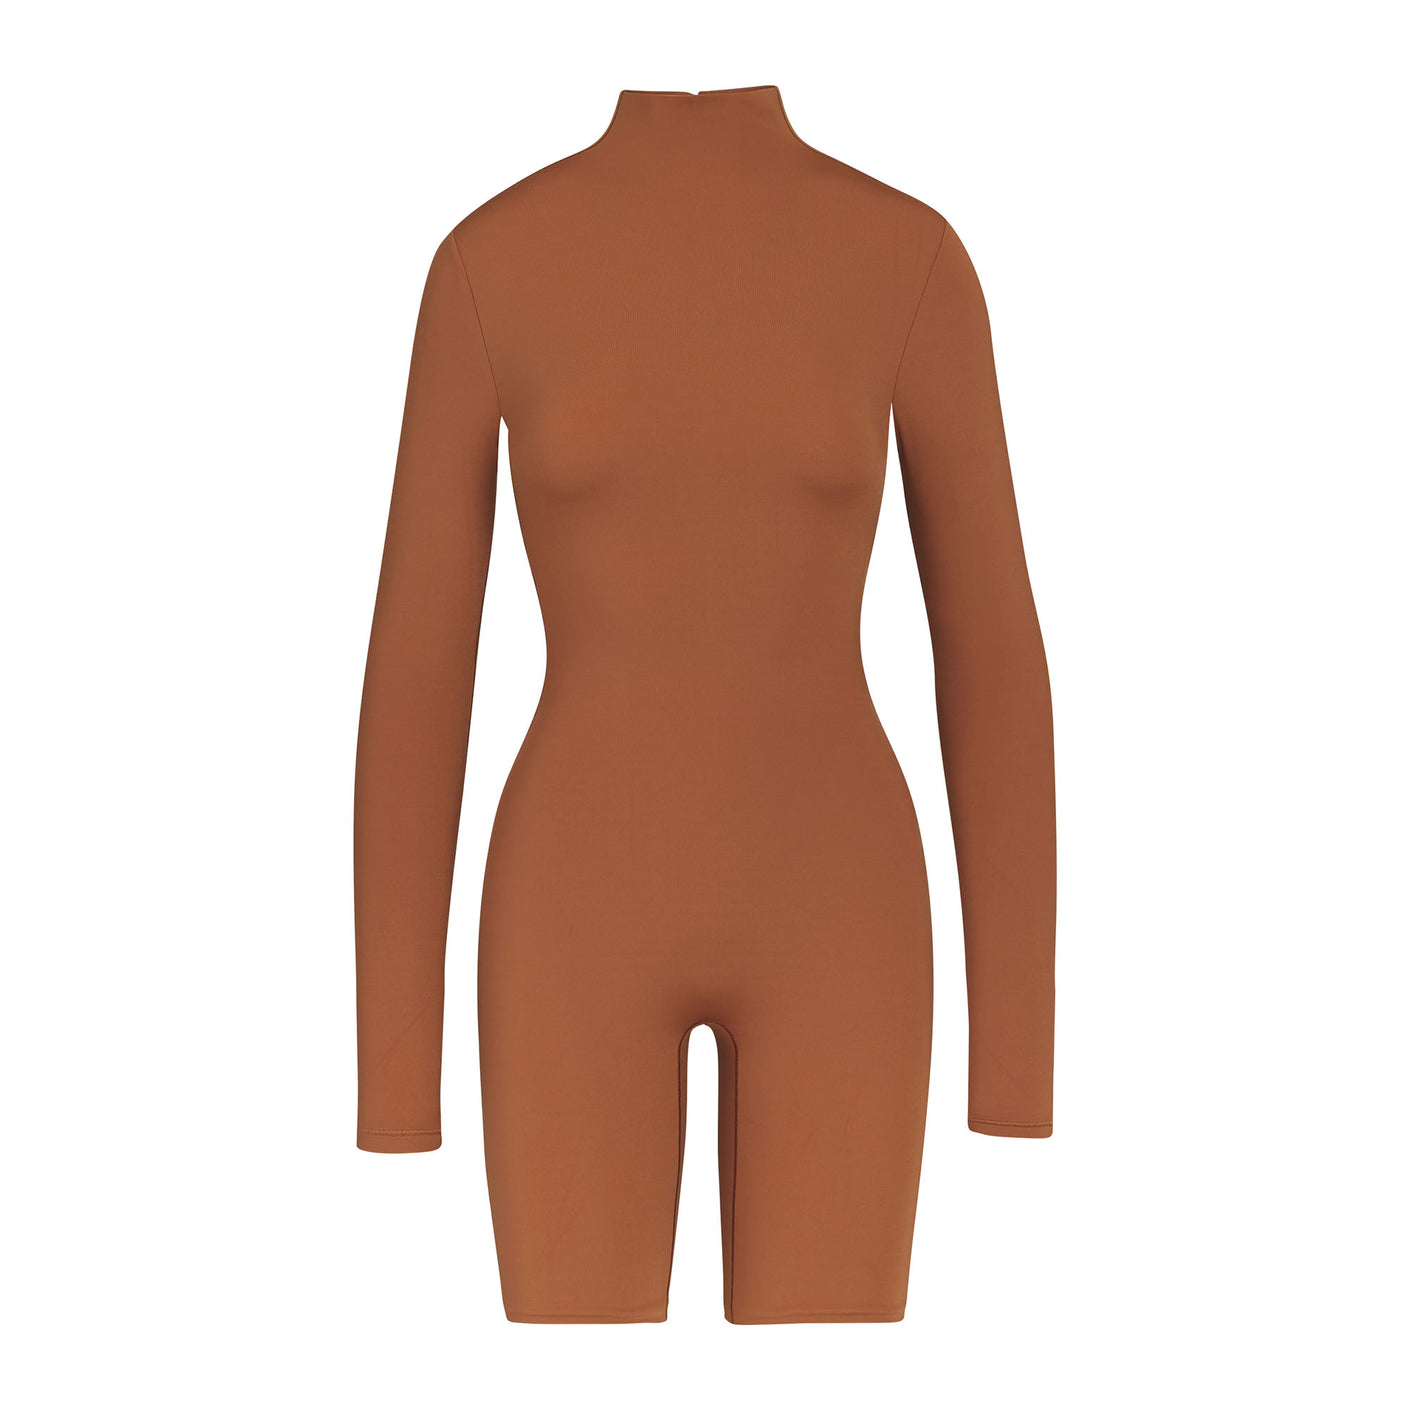 All-In-One Long Sleeve Mid Thigh Onesie - Caramel | SKIMS